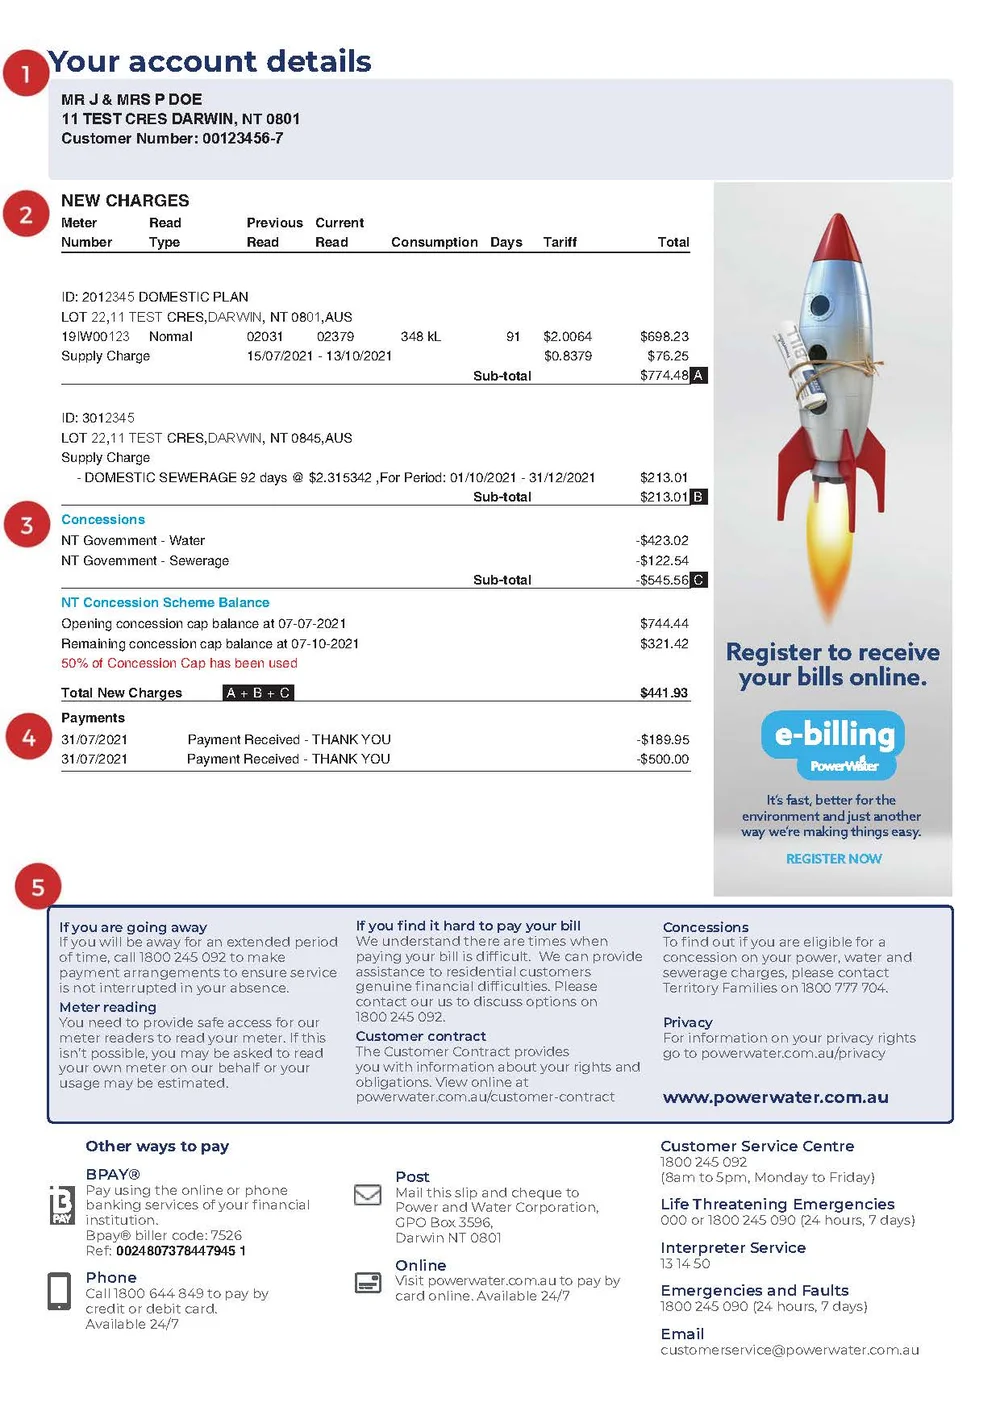 Power Water invoice page 2